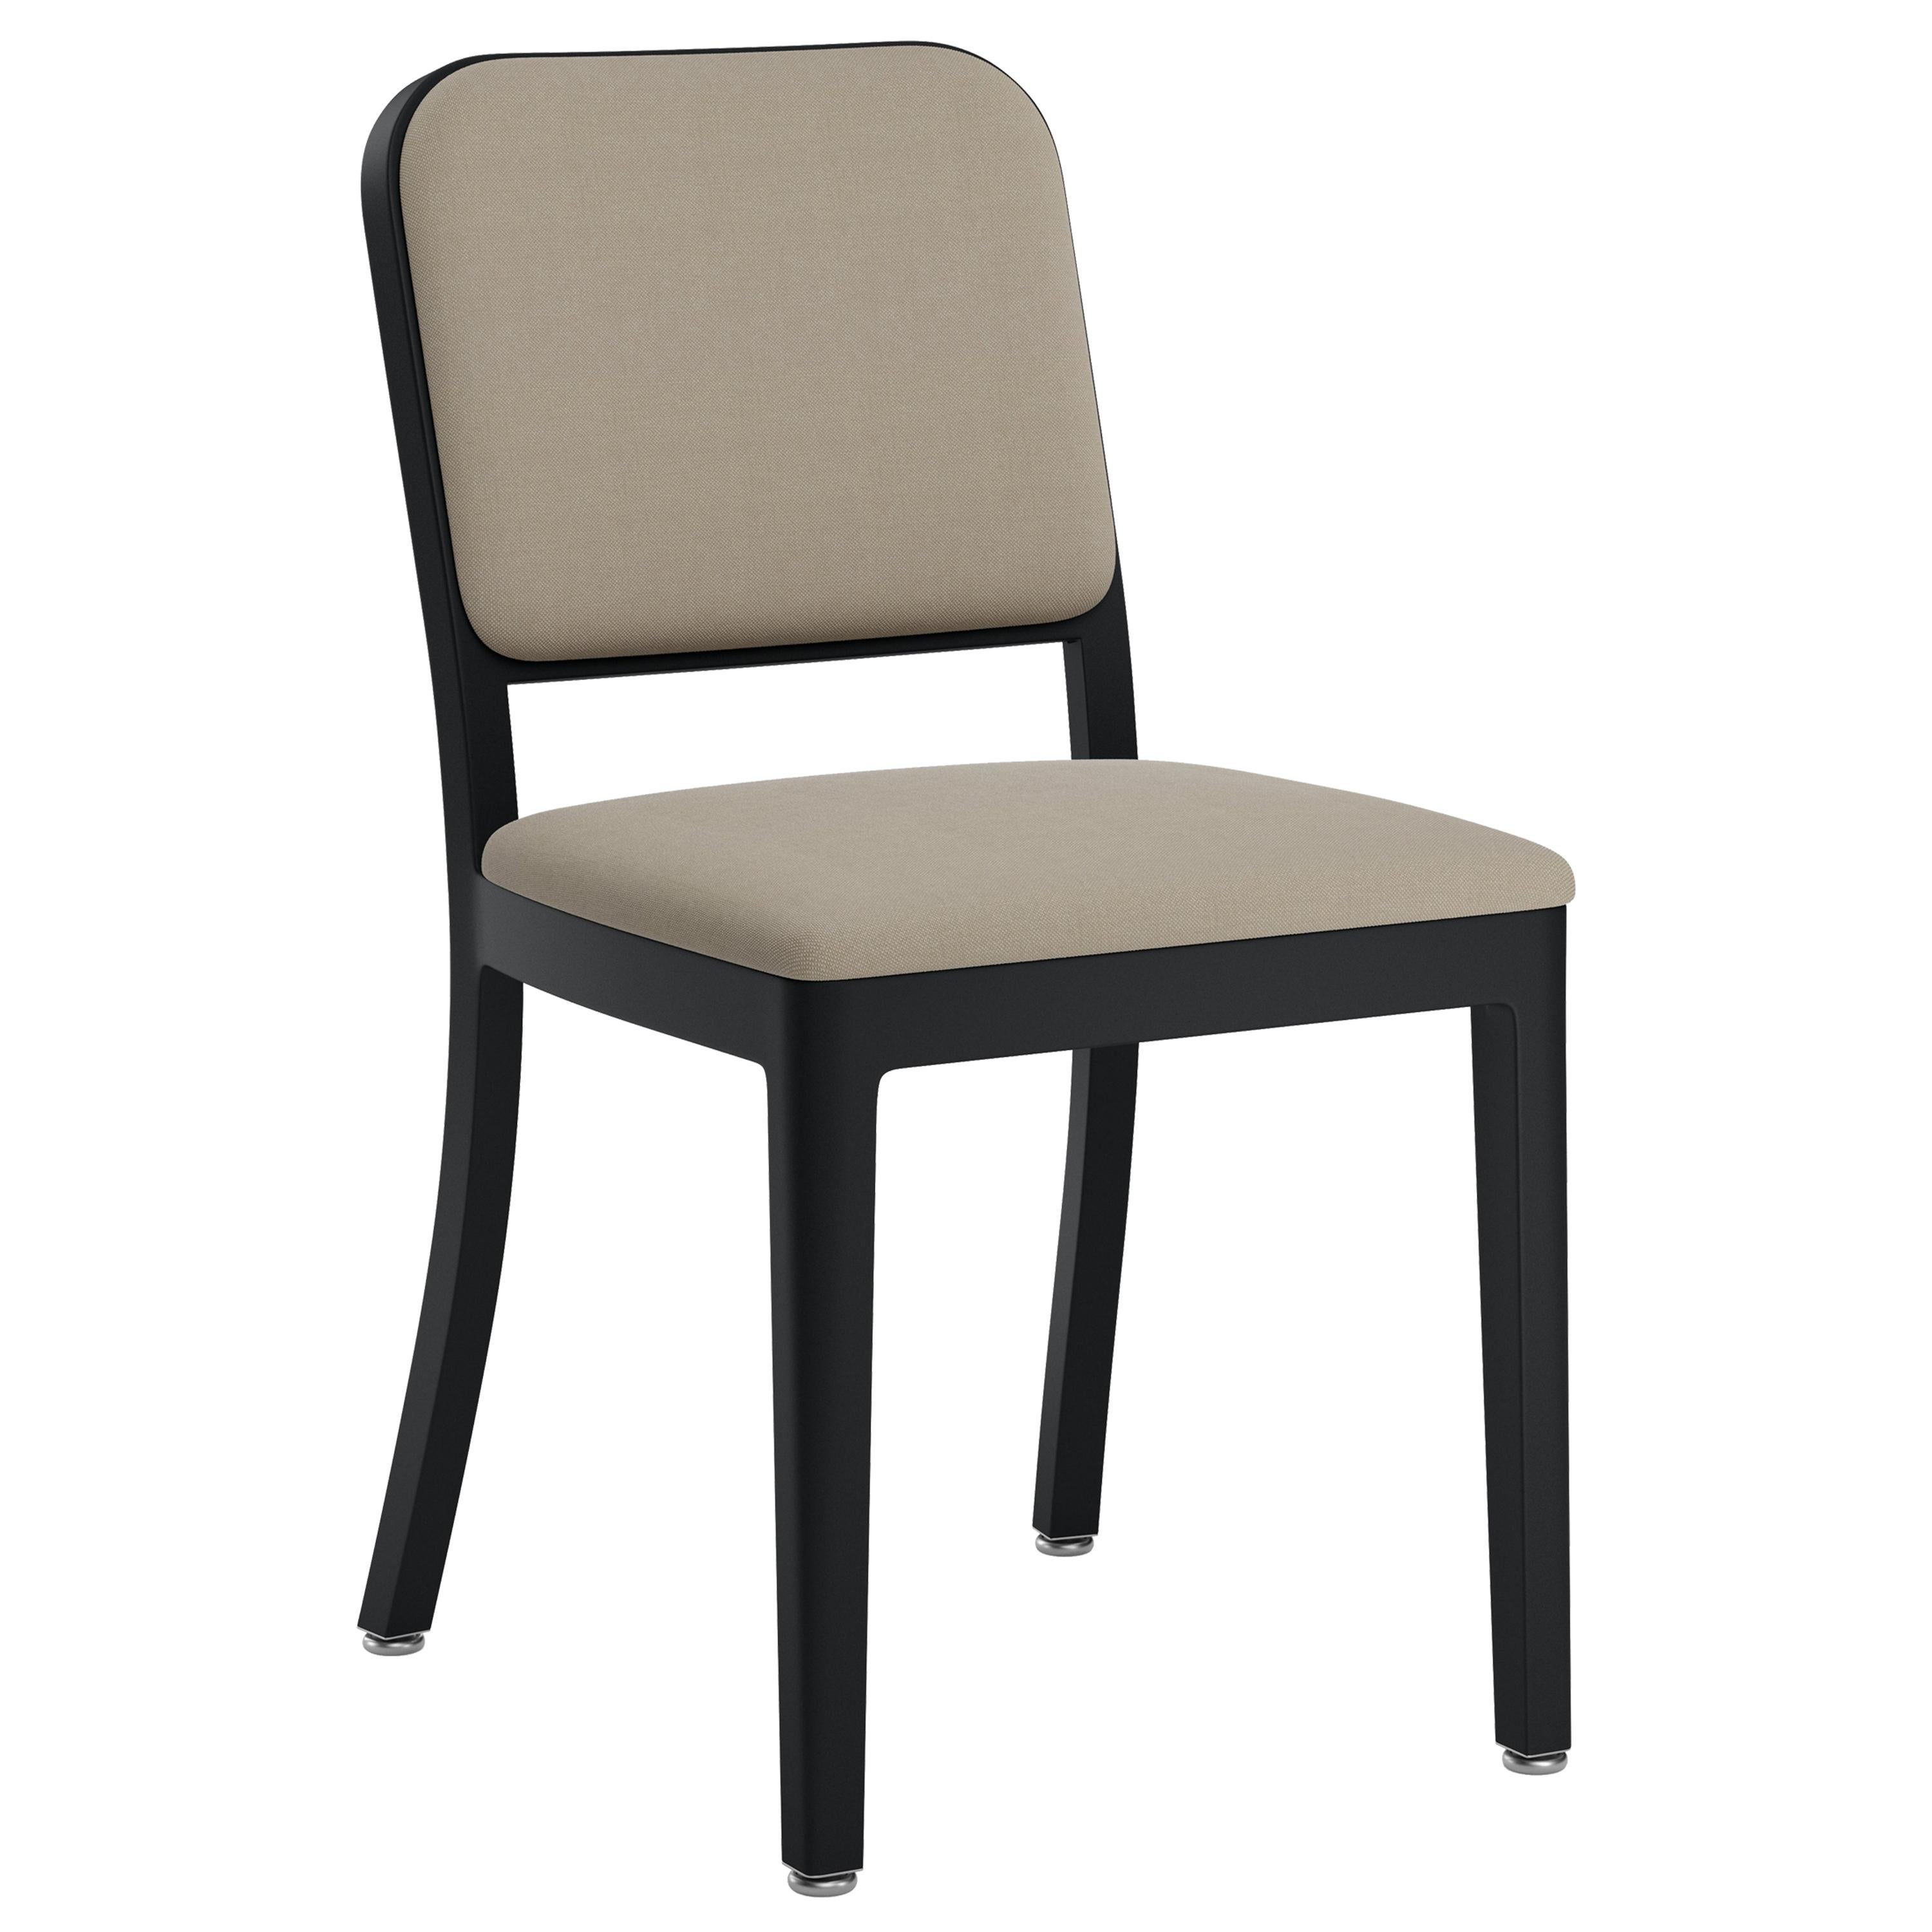 Emeco Navy Officer Side Chair in Beige Fabric with Black Powder Coated Frame For Sale